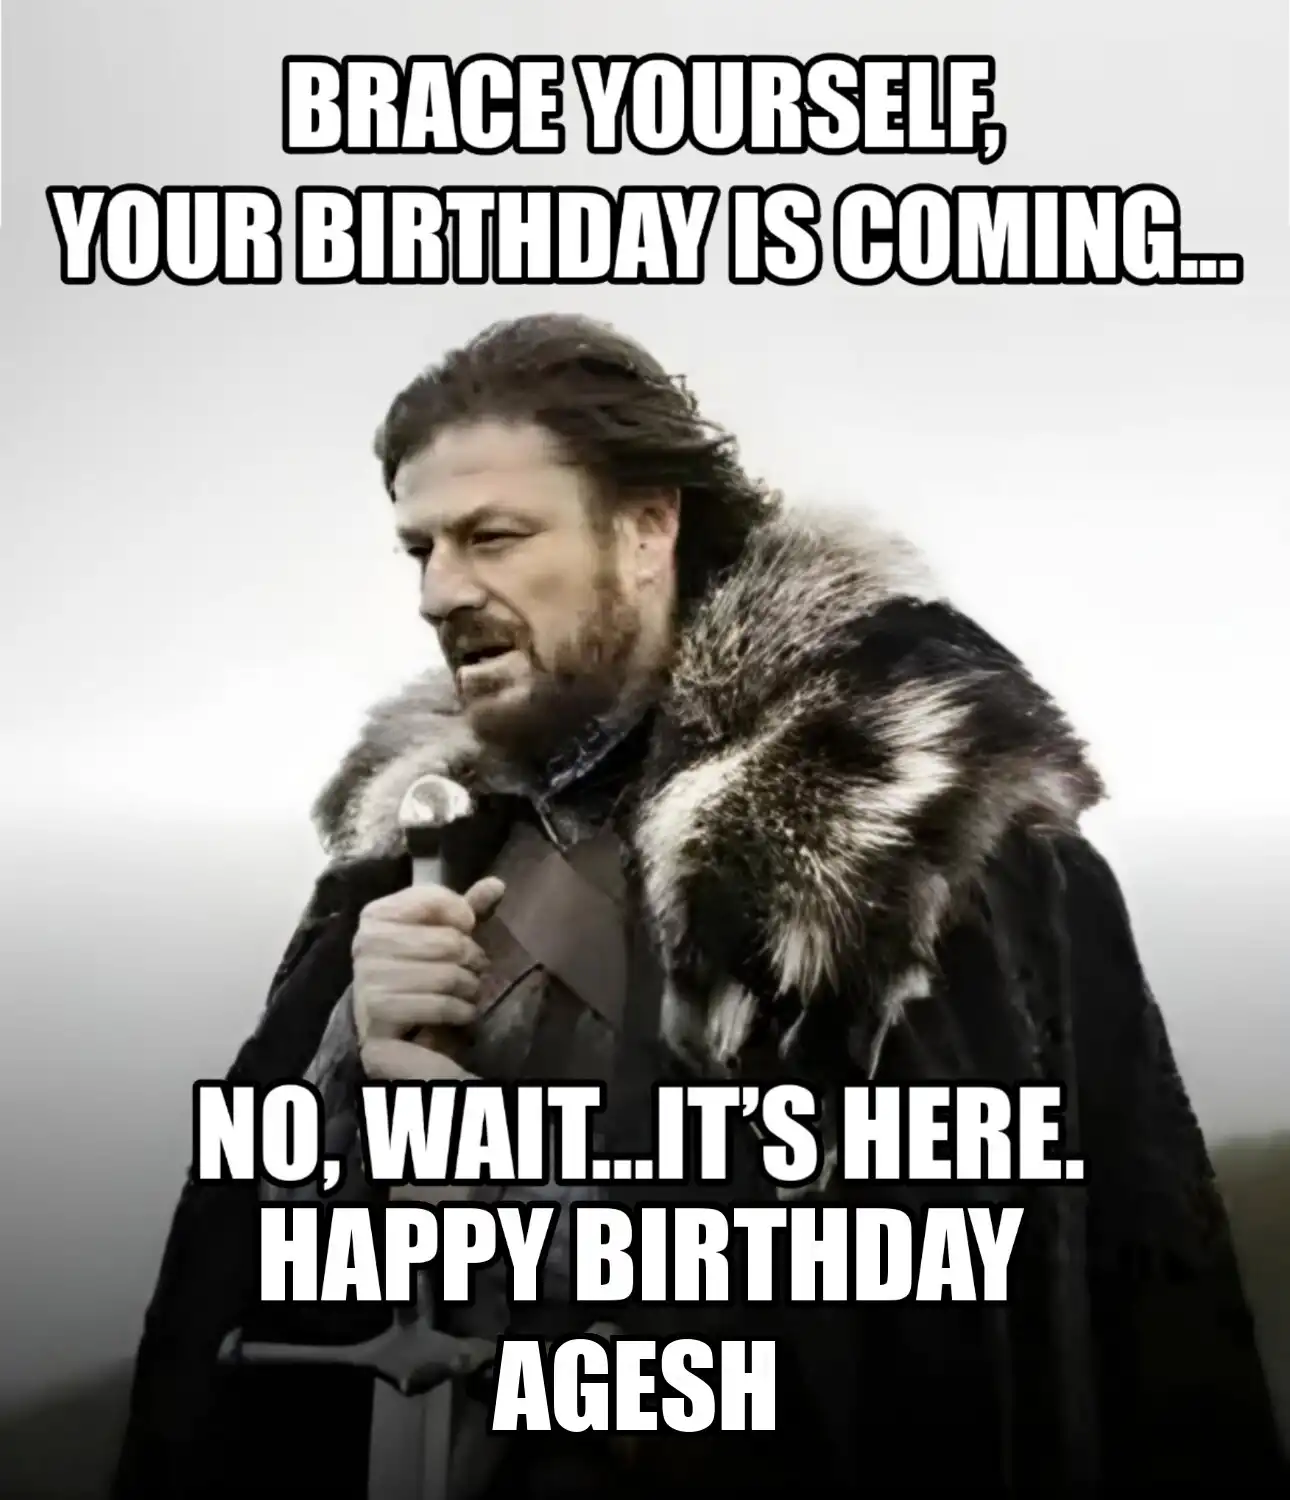 Happy Birthday Agesh Brace Yourself Your Birthday Is Coming Meme